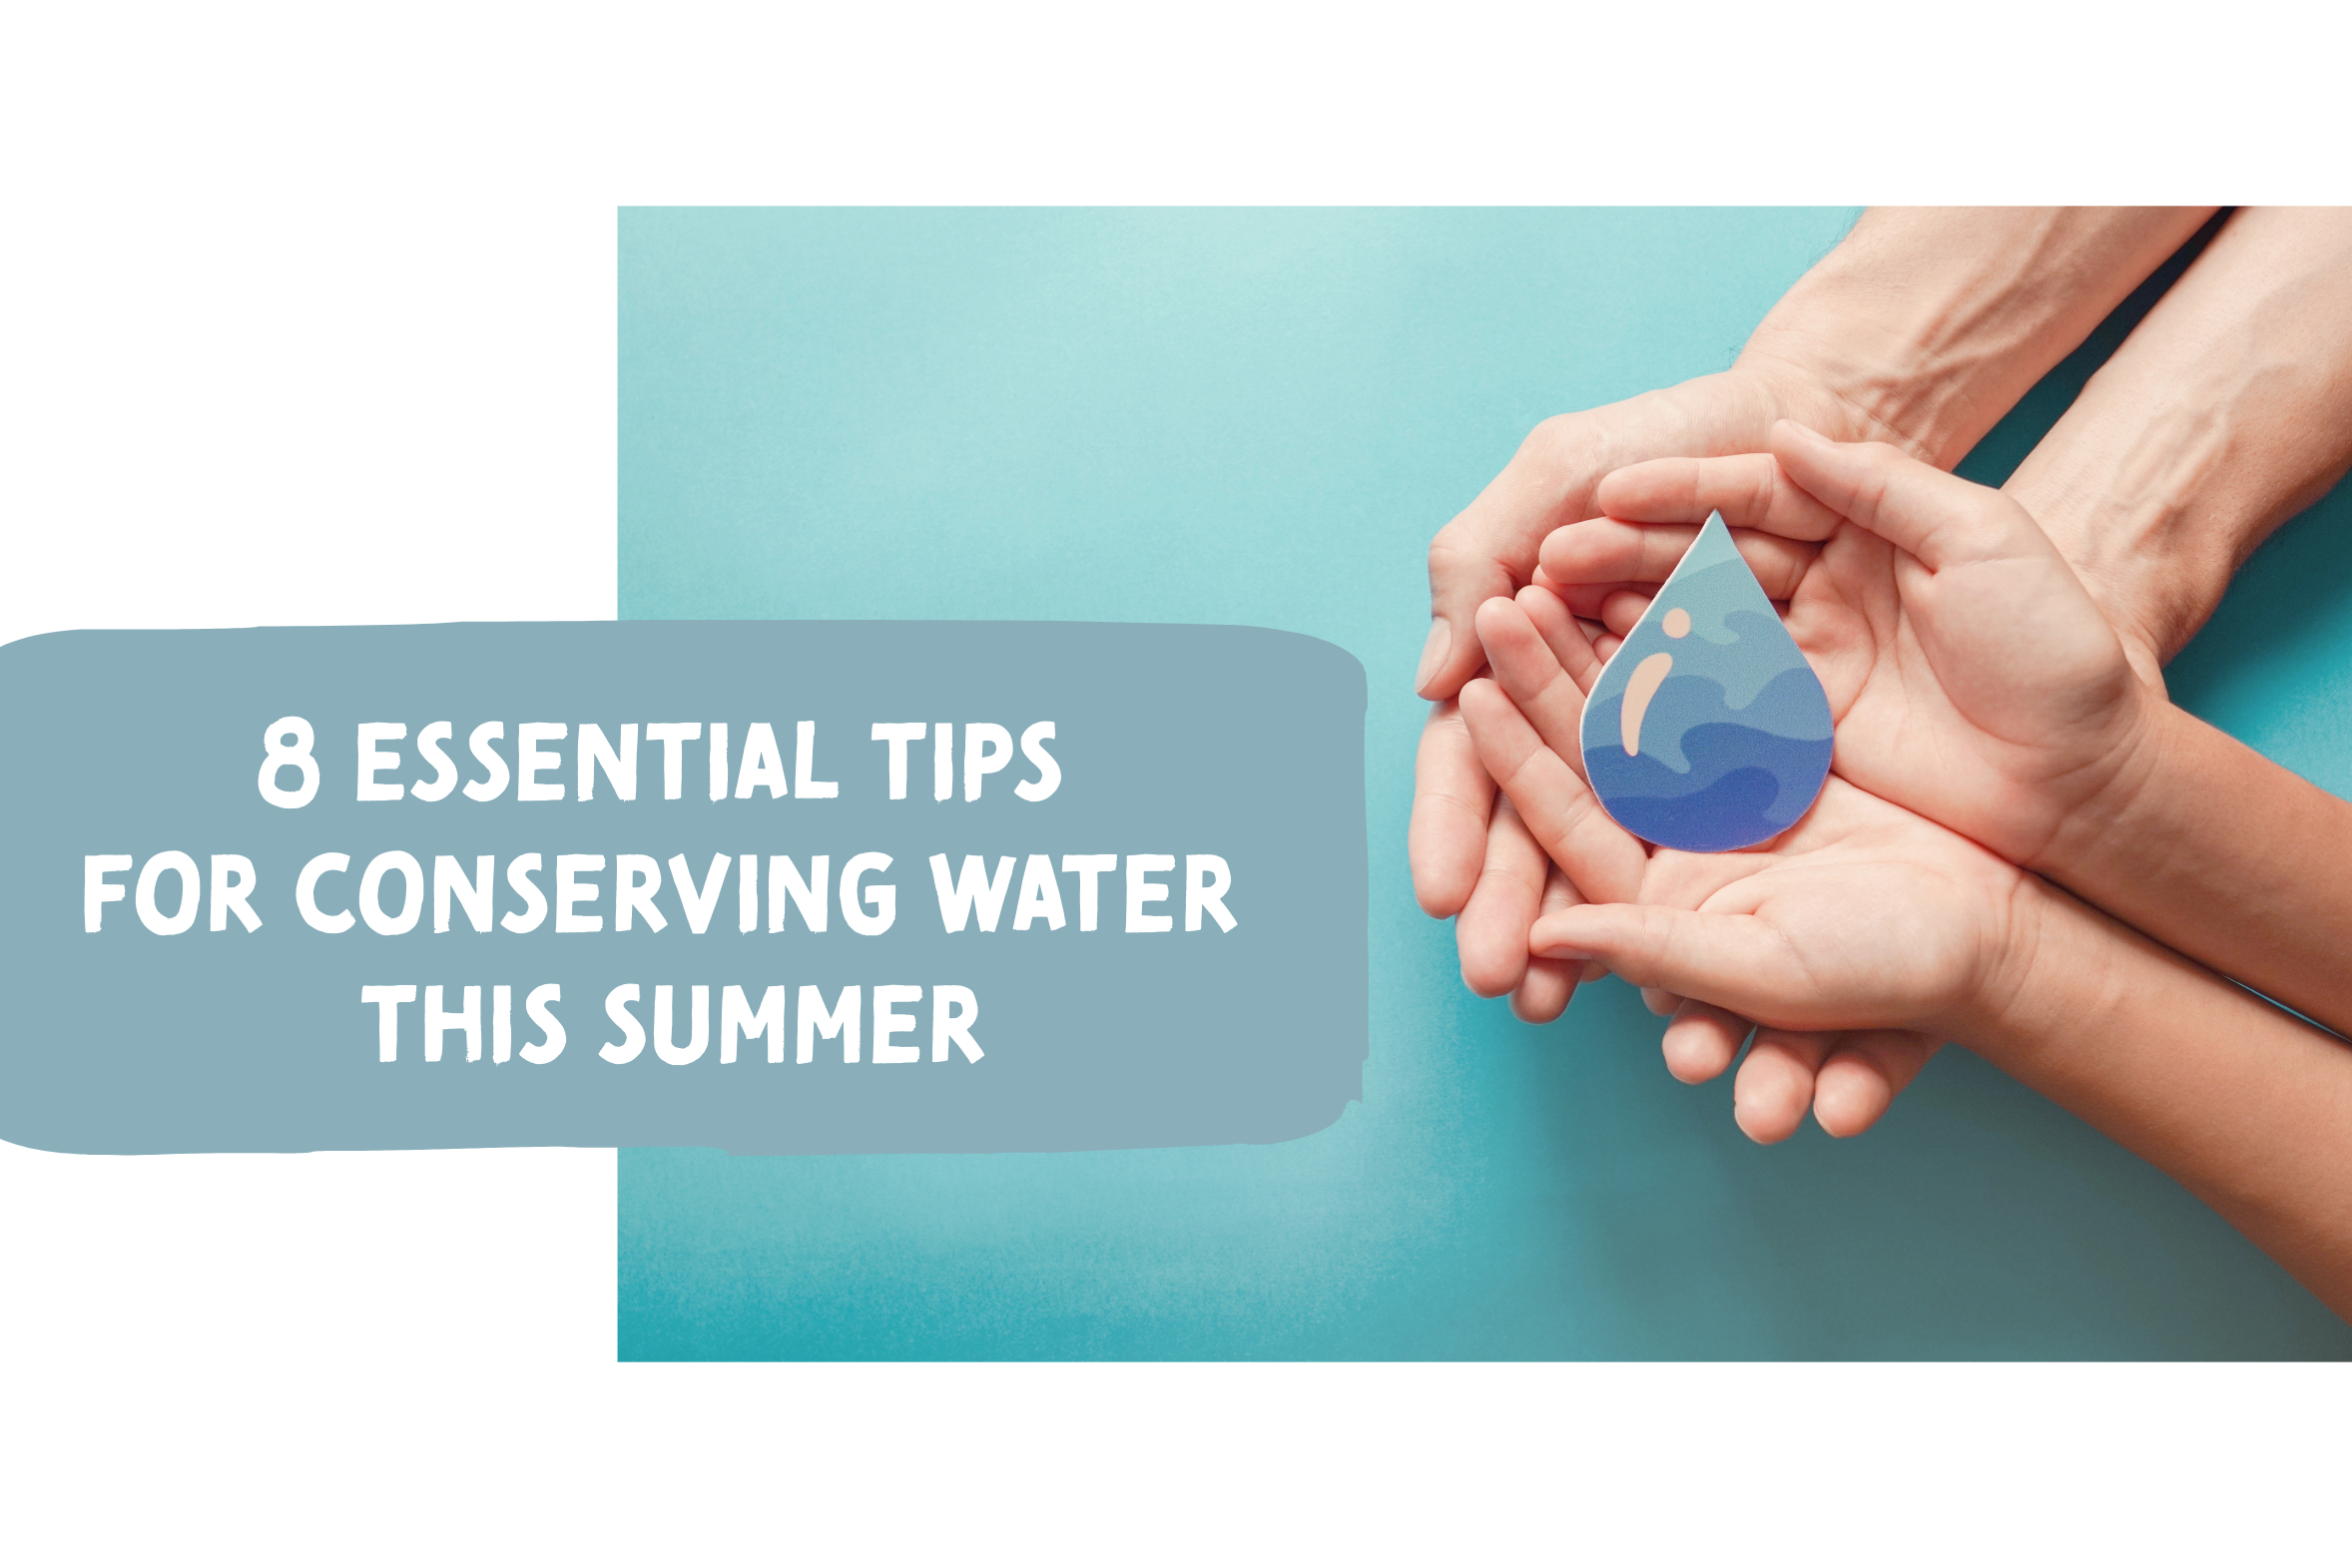 Blog about conserving water in the summer.